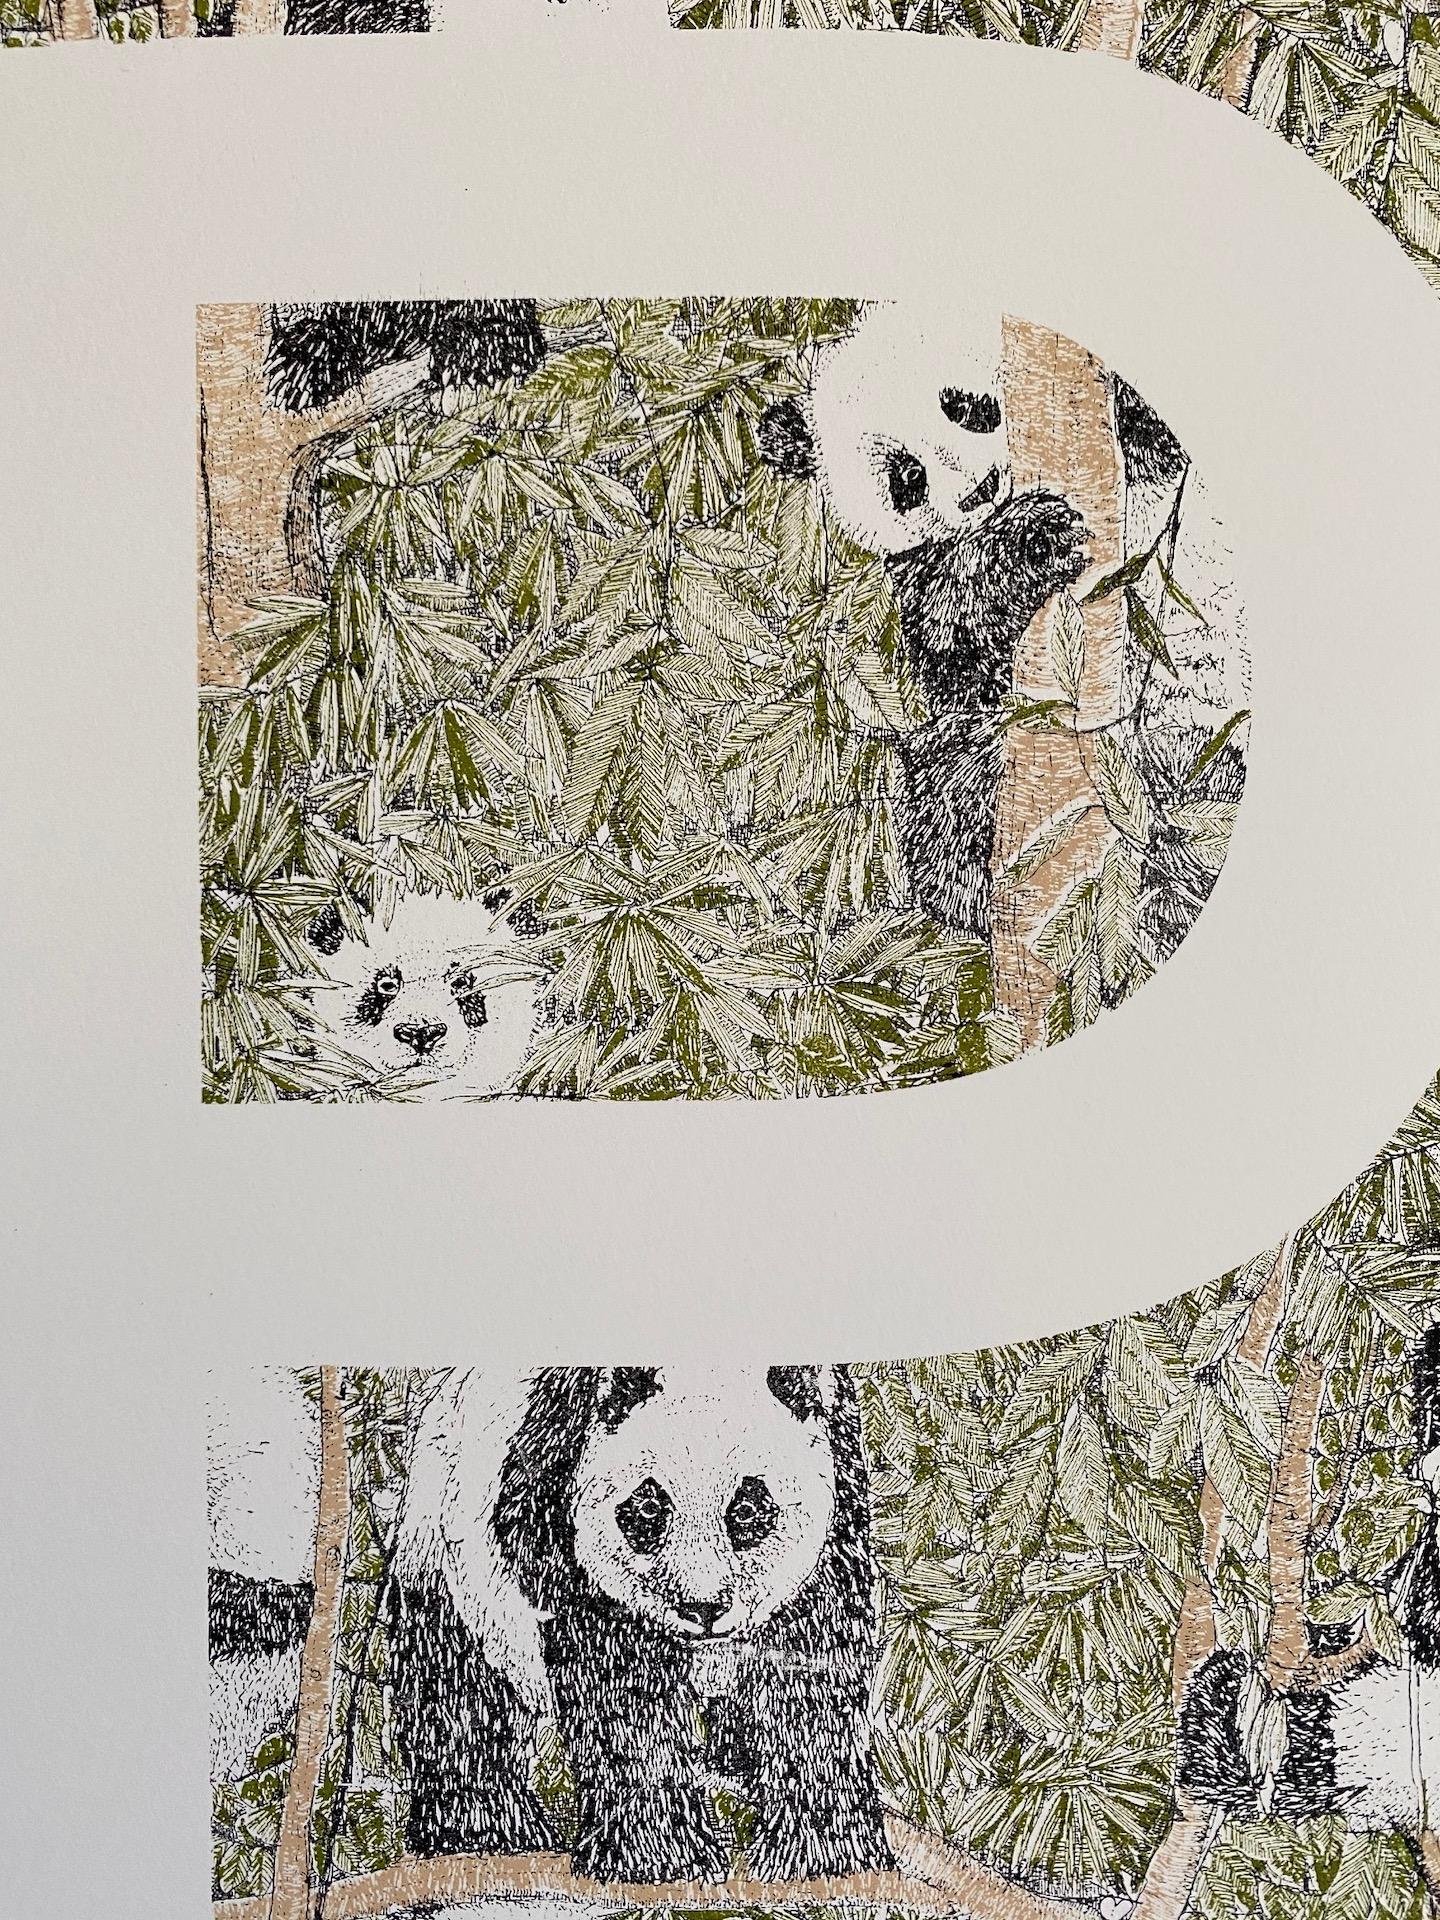 Clare Halifax, P is for Panda, Affordable Contemporary Art, Alphabet Prints 2